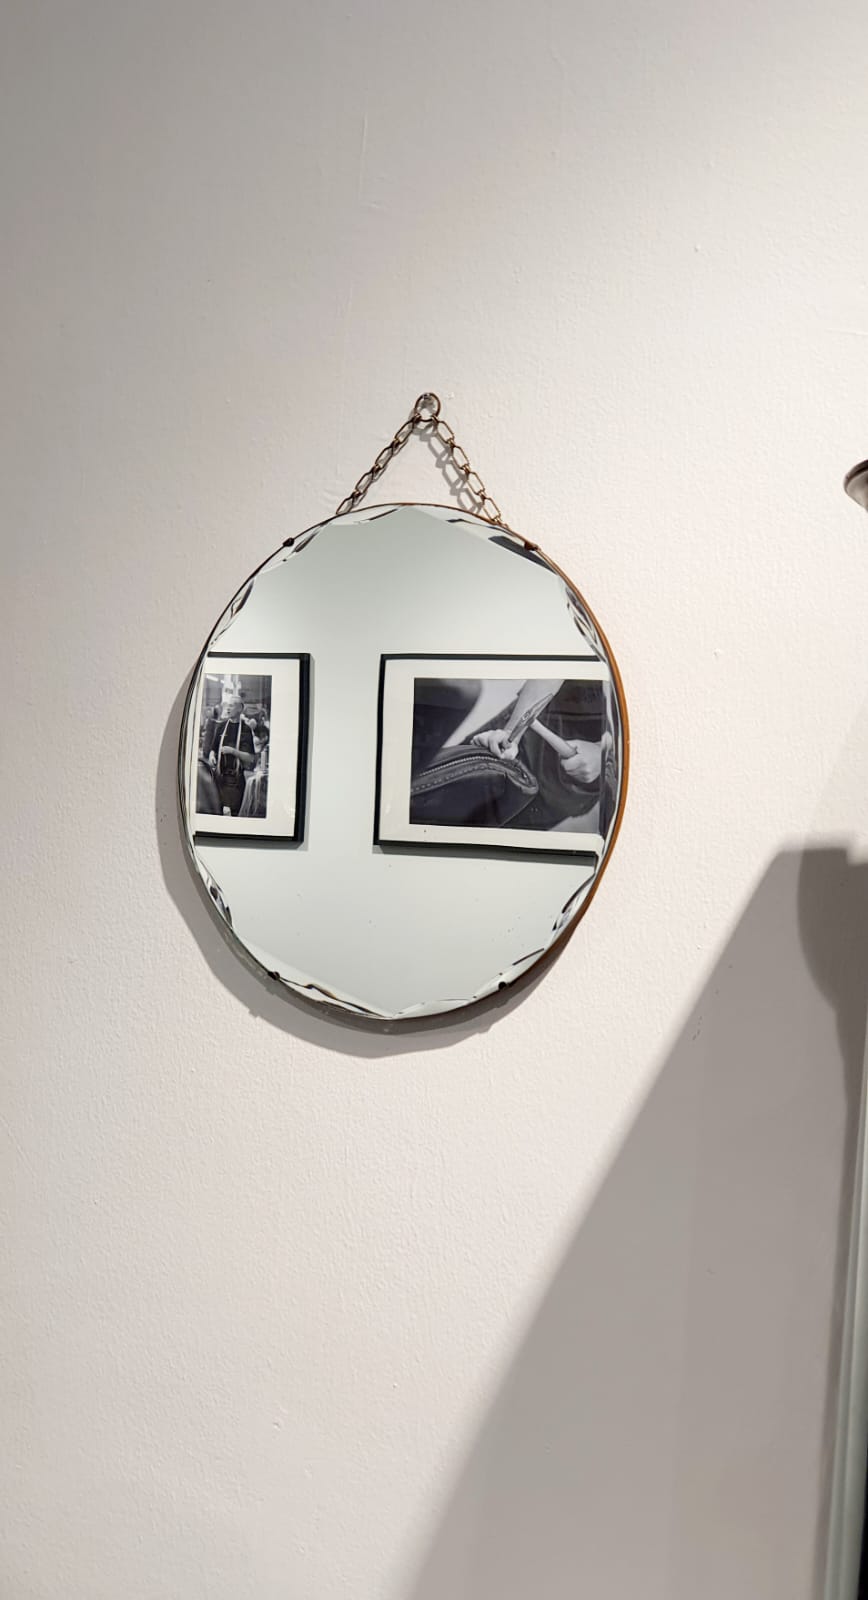 A round vintage mirror with a beveled edge